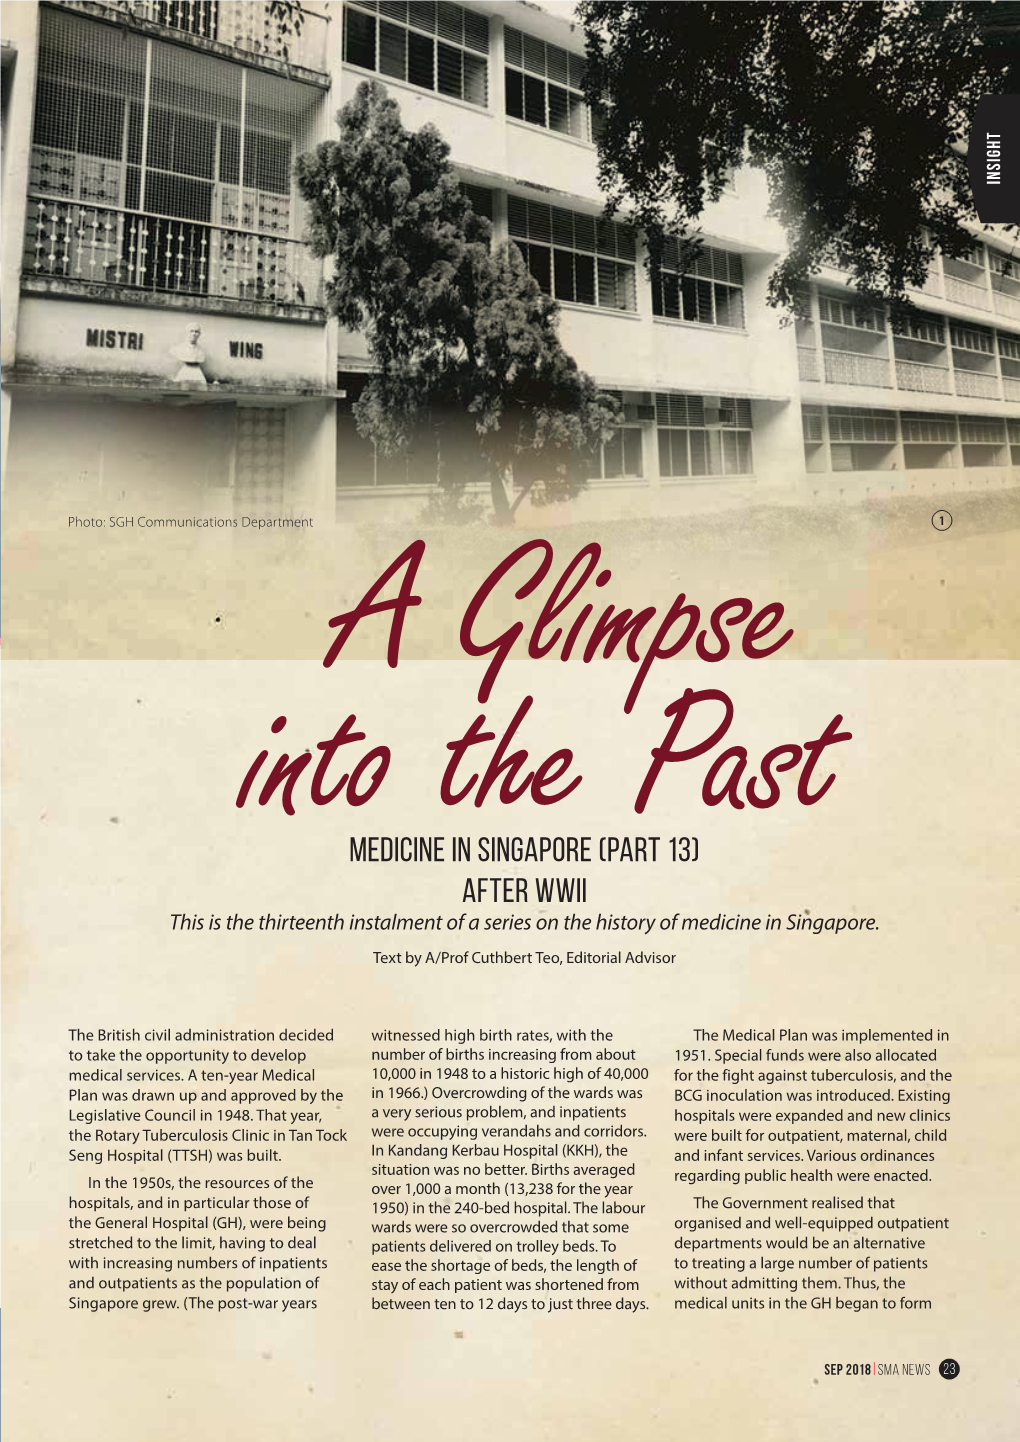 Medicine in Singapore (Part 13) After WWII